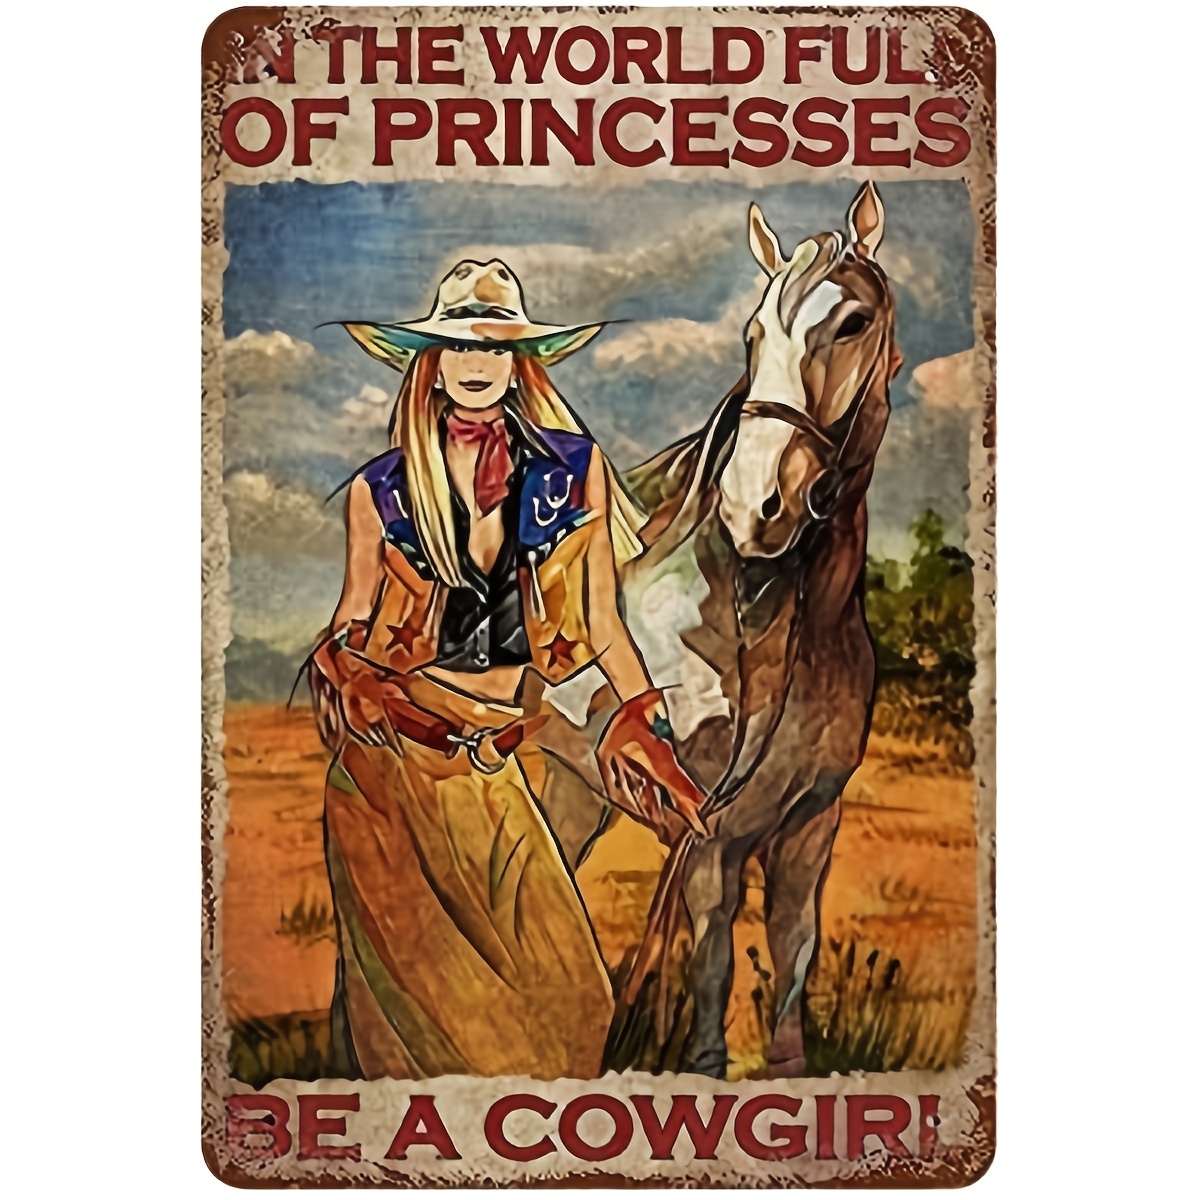 1pc Cowgirl In A World Full Of Princess Be A Cowgirl Retro Metal Tin Sign Retro Wall Decor Vintage Kitchen Baking Tin Sign For Home Wall Decor Gifts 12x8 Inch